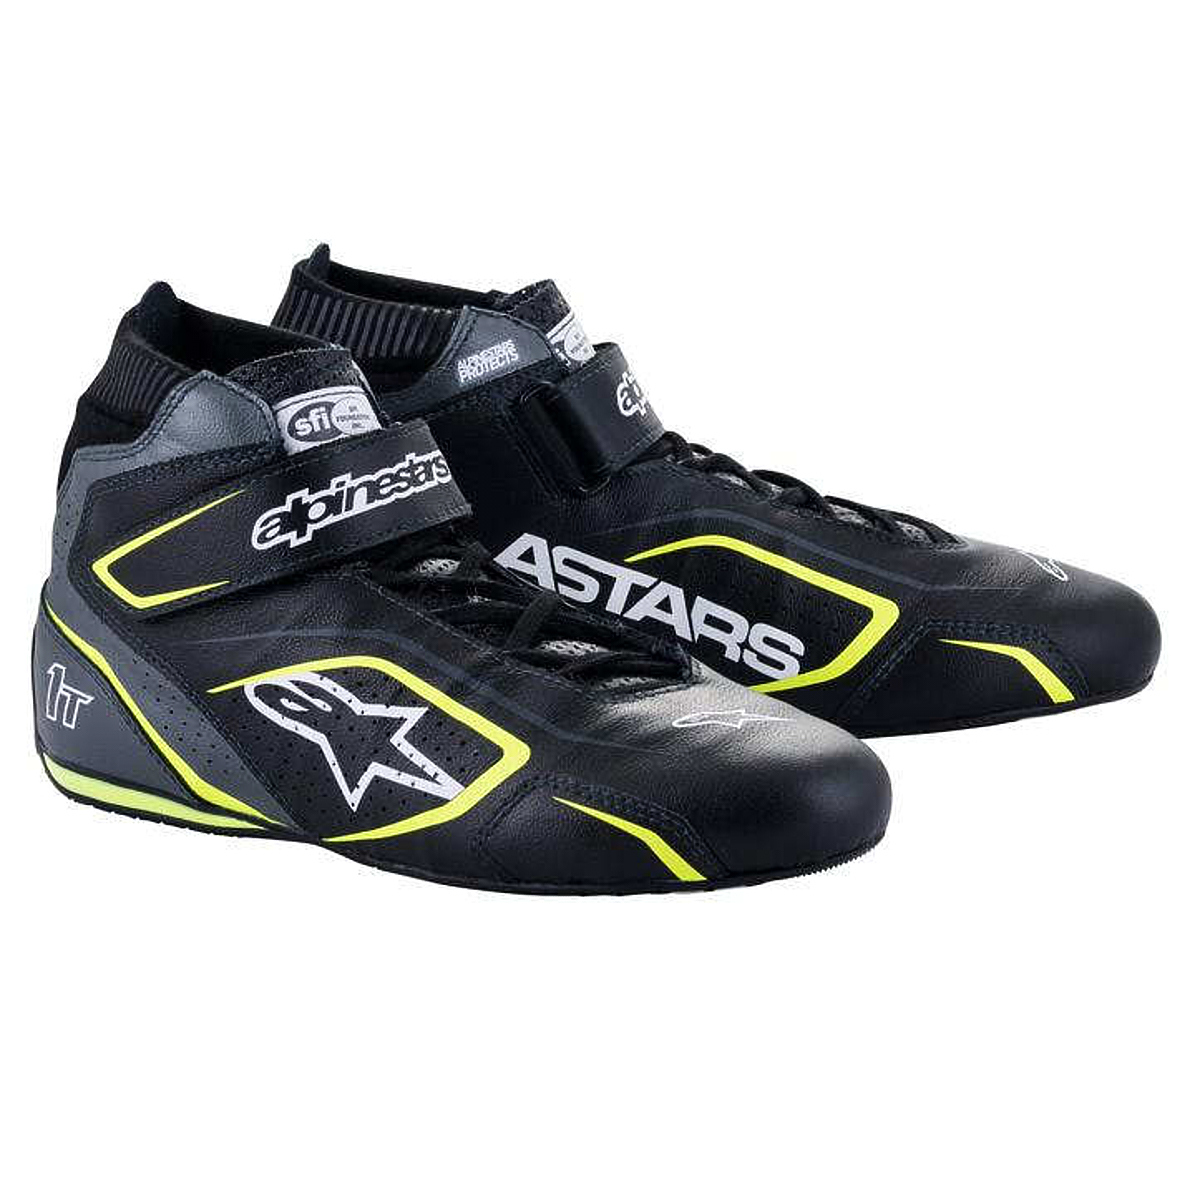 Alpinestars 2710122-1055-105 - Shoe, Tech 1-T V3, Driving, Mid-Top, SFI 3.3, Leather Outer, Nomex Inner, Black / Fluorescent Yellow, Size 10.5, Pair